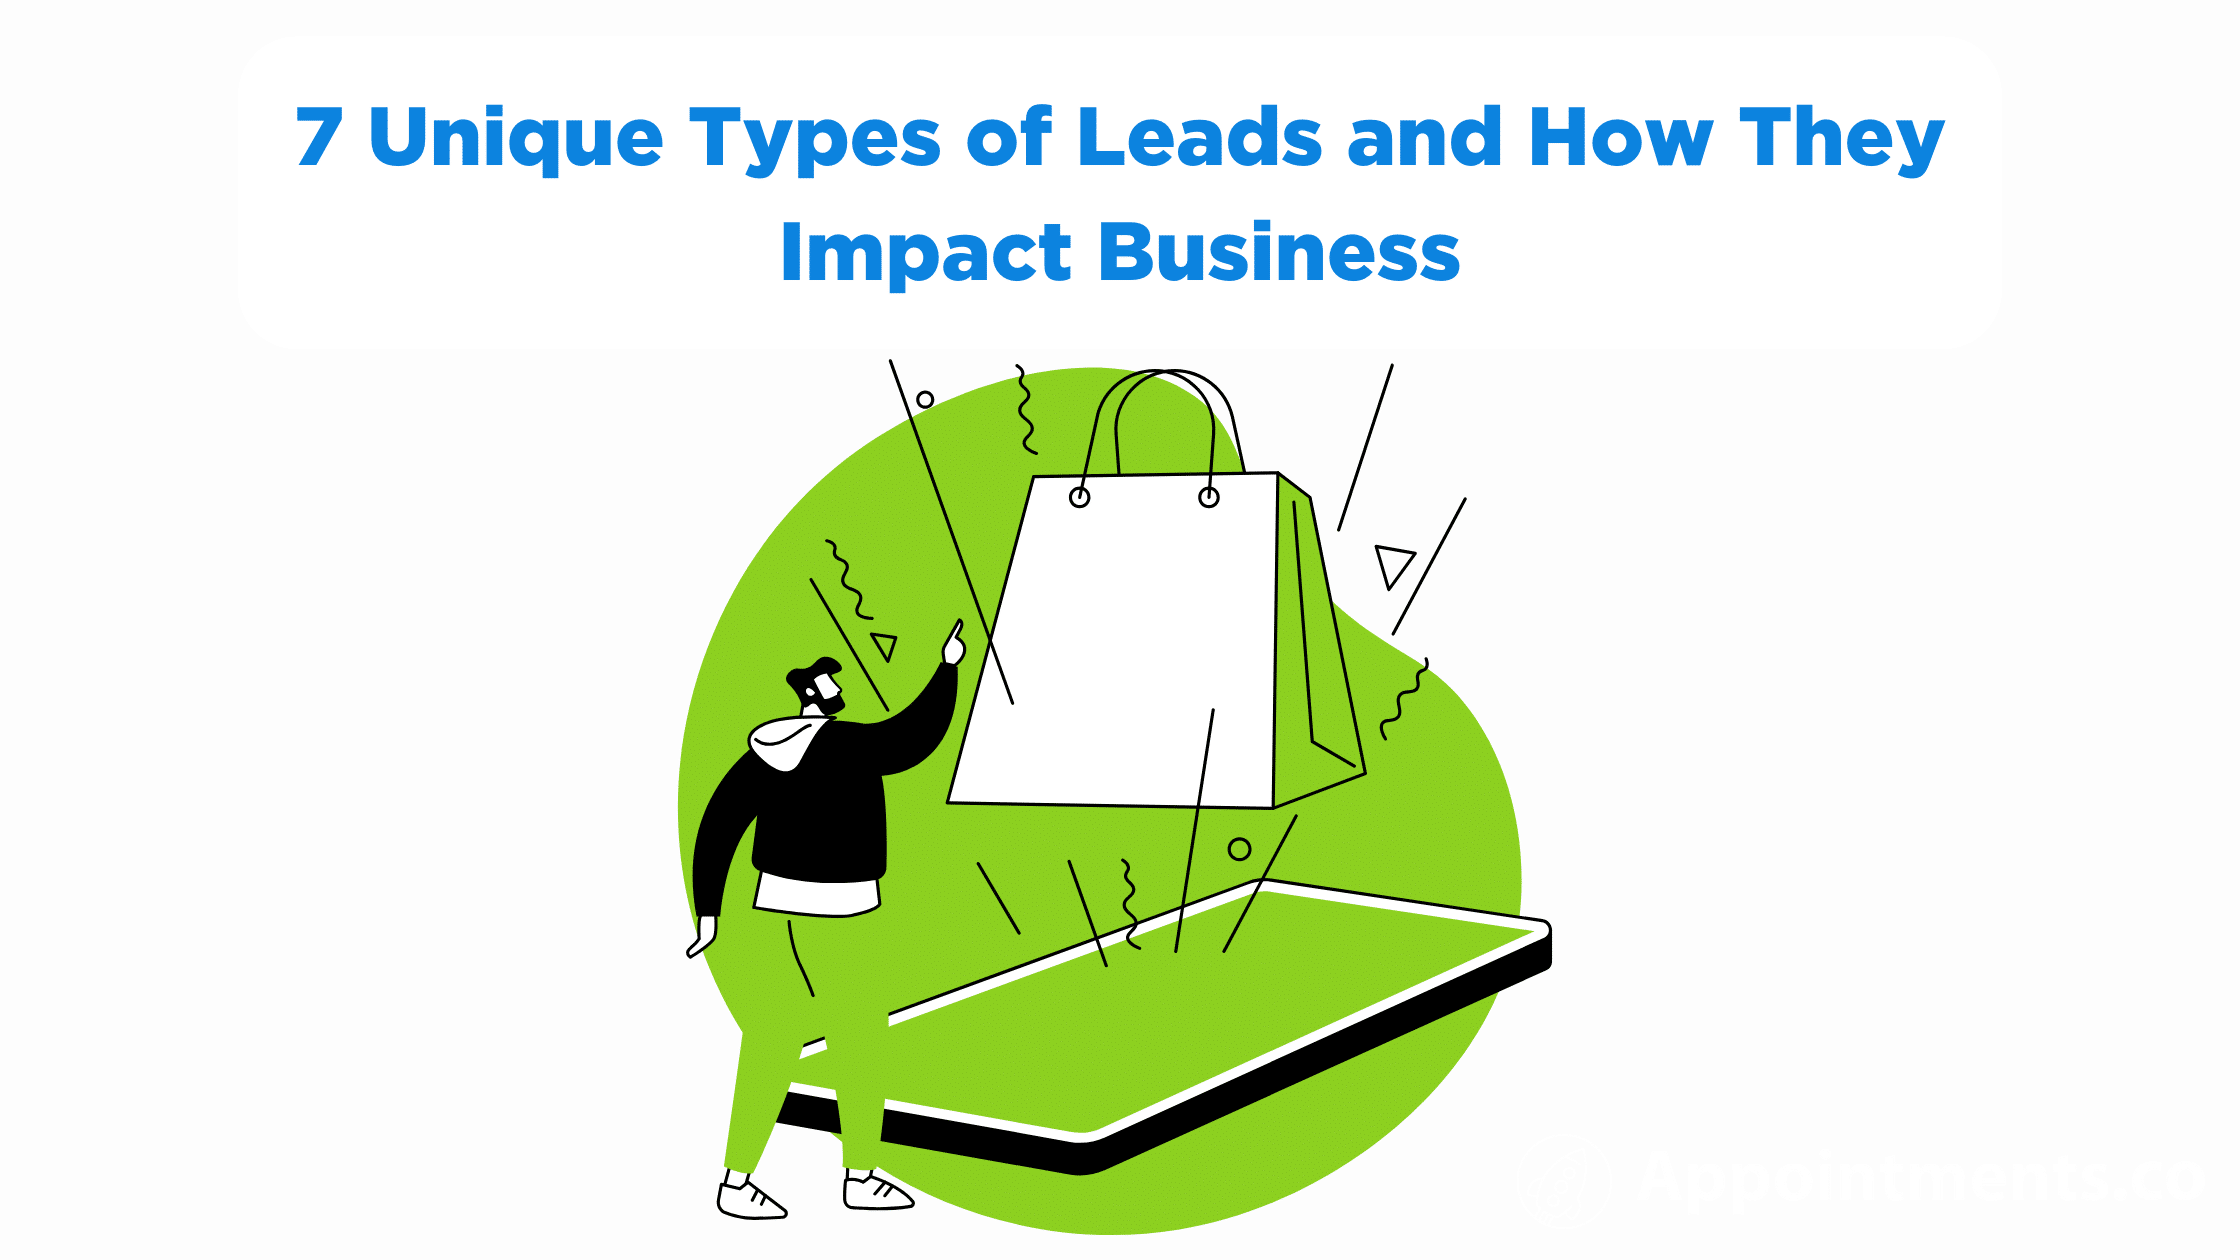 7 Unique Types of Leads and How They Impact Business